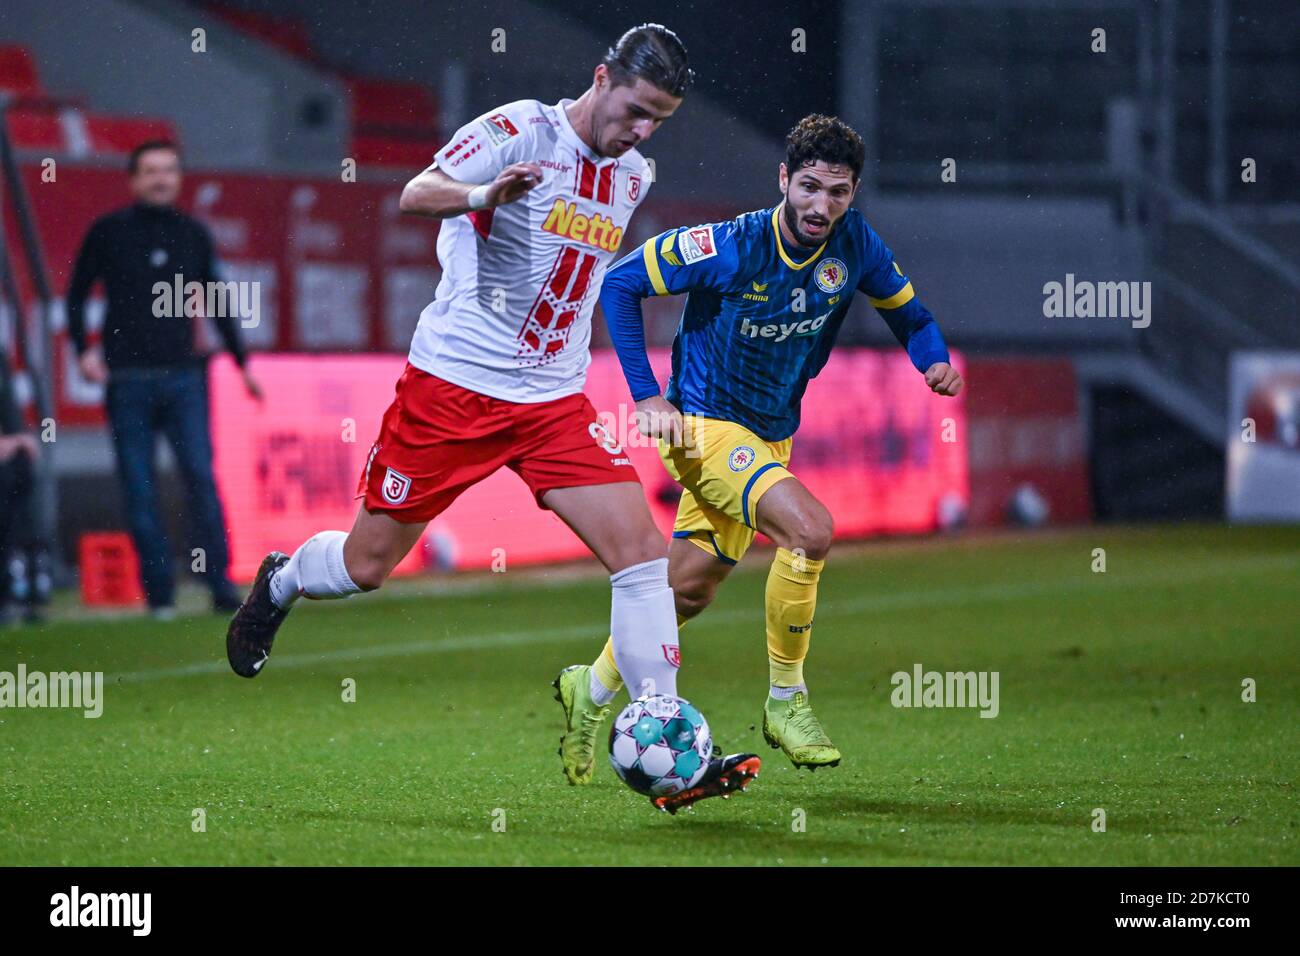 Regensburg, Germany. 23rd Oct, 2020. Football: 2nd Bundesliga, Jahn Regensburg - Eintracht Braunschweig, 5th matchday. Jan Elvedi from Regensburg (l) and Fabio Kaufmann from Braunschweig fight for the ball. Credit: Armin Weigel/dpa - IMPORTANT NOTE: In accordance with the regulations of the DFL Deutsche Fußball Liga and the DFB Deutscher Fußball-Bund, it is prohibited to exploit or have exploited in the stadium and/or from the game taken photographs in the form of sequence images and/or video-like photo series./dpa/Alamy Live News Stock Photo